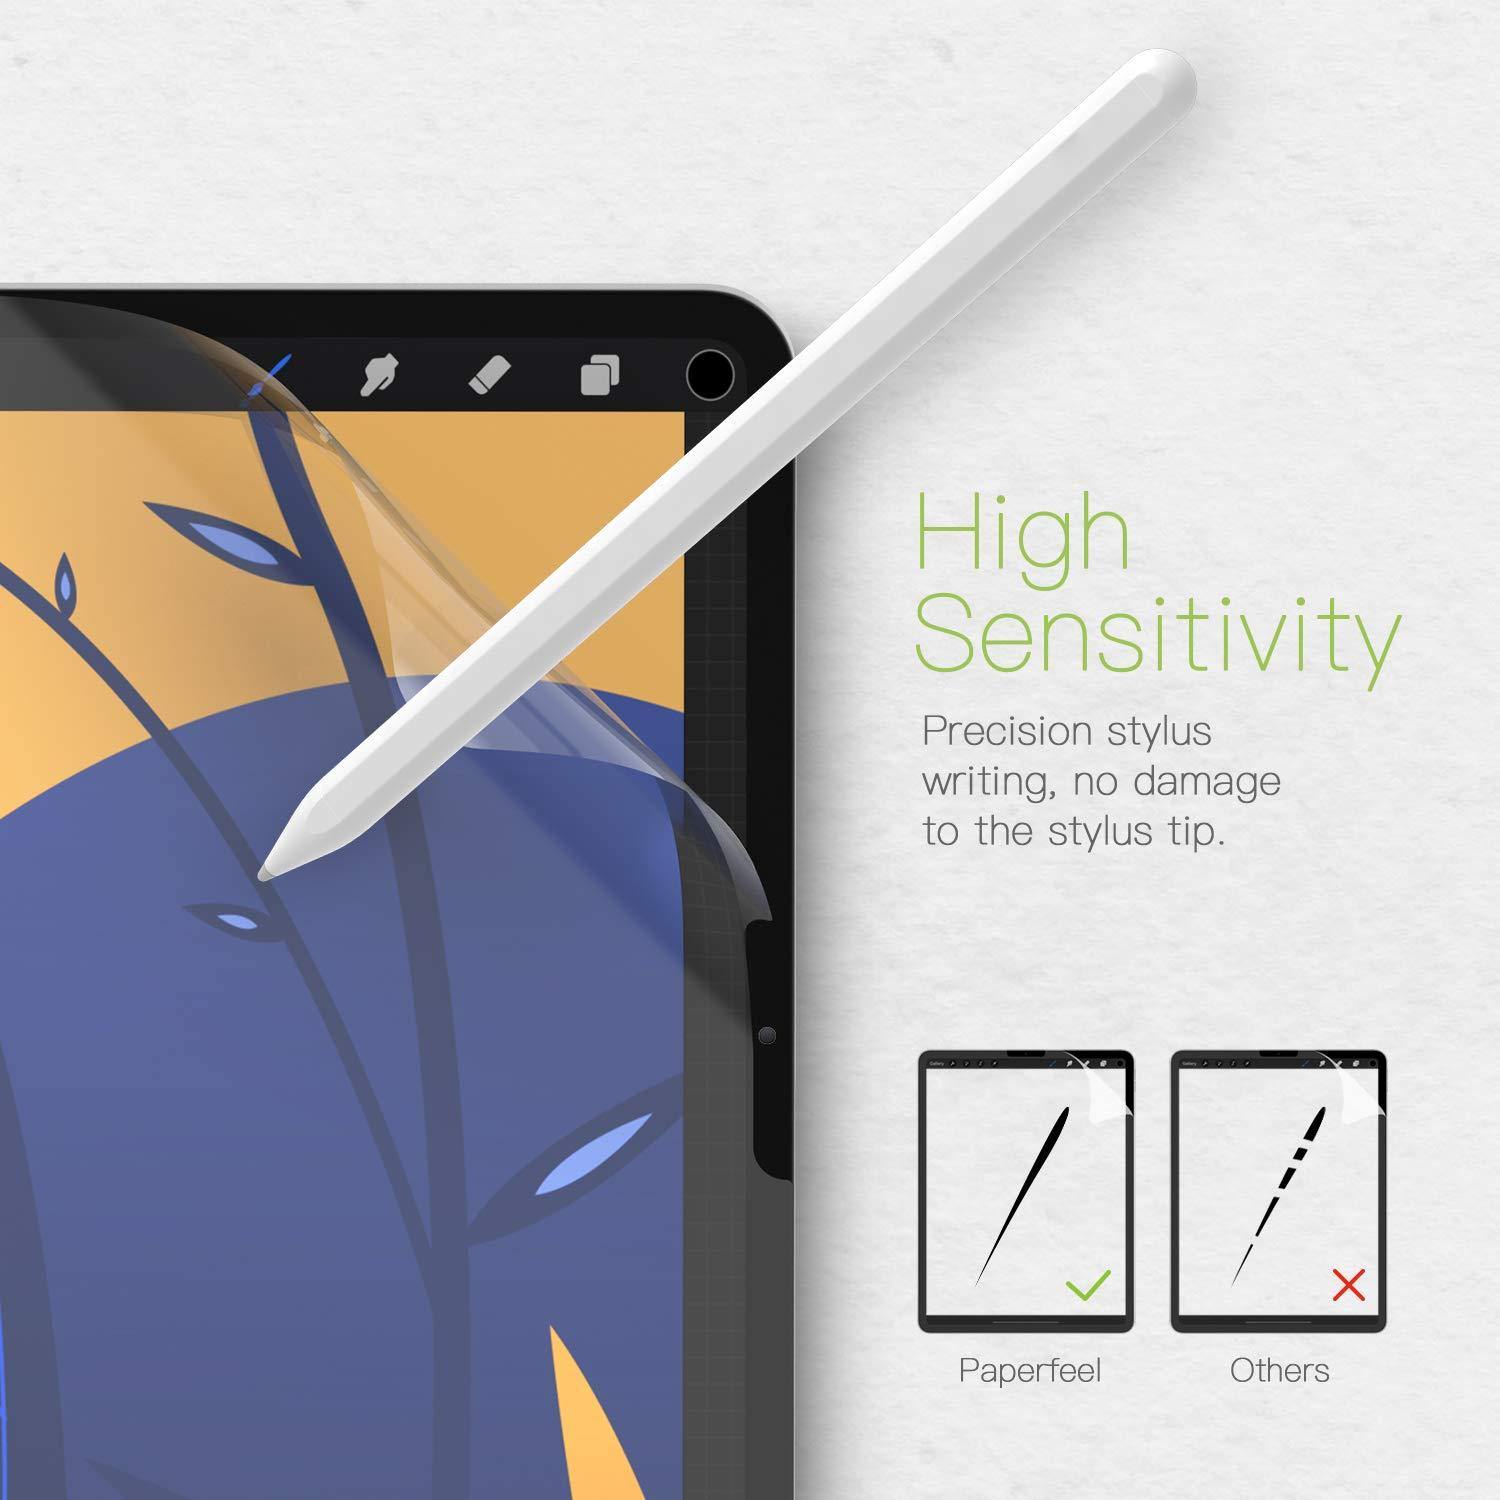 Paperlike Screen Protector – how to make your iPad feel like paper -  TapSmart